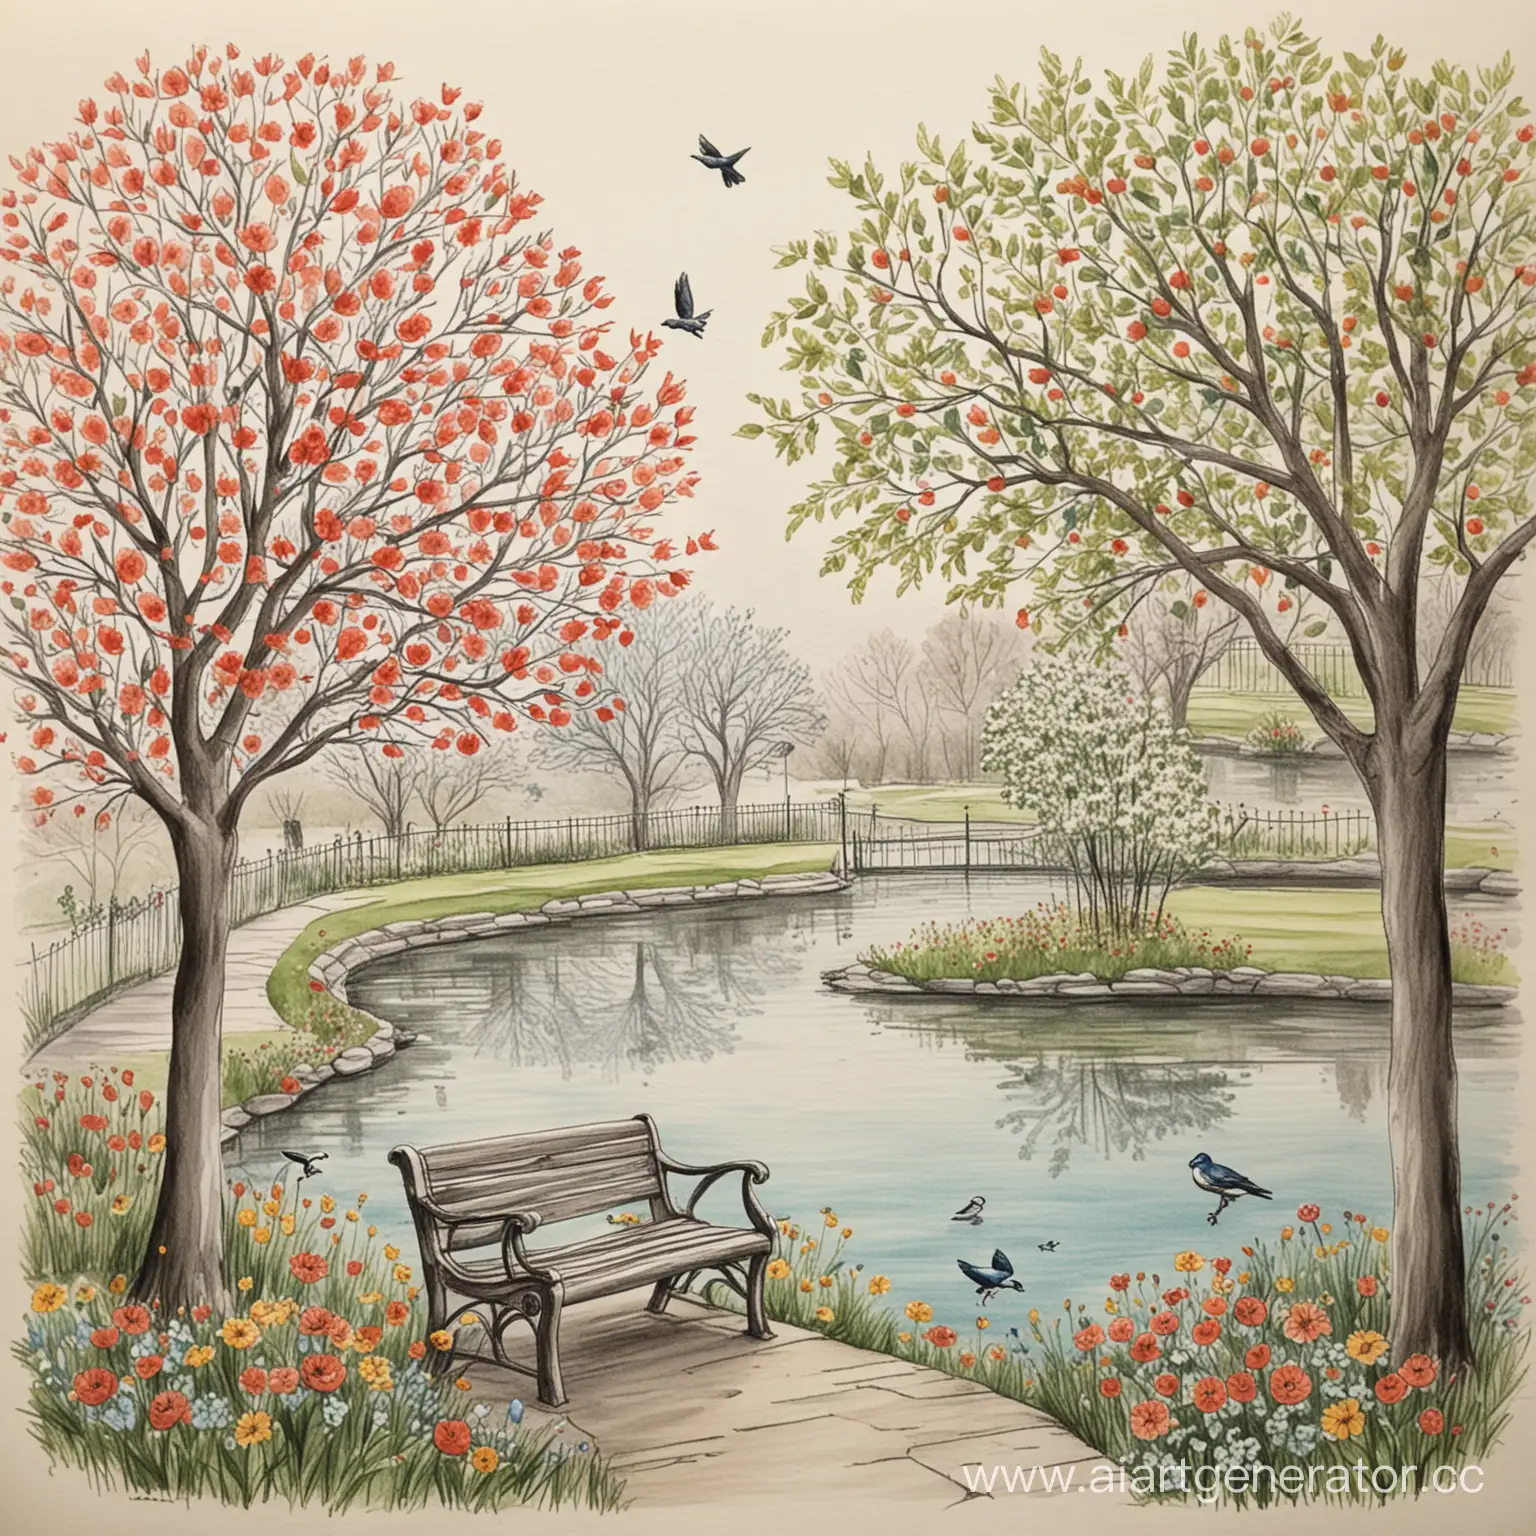 Tranquil-Park-Scene-with-Apple-Tree-Birds-Bench-Flowers-and-Pond